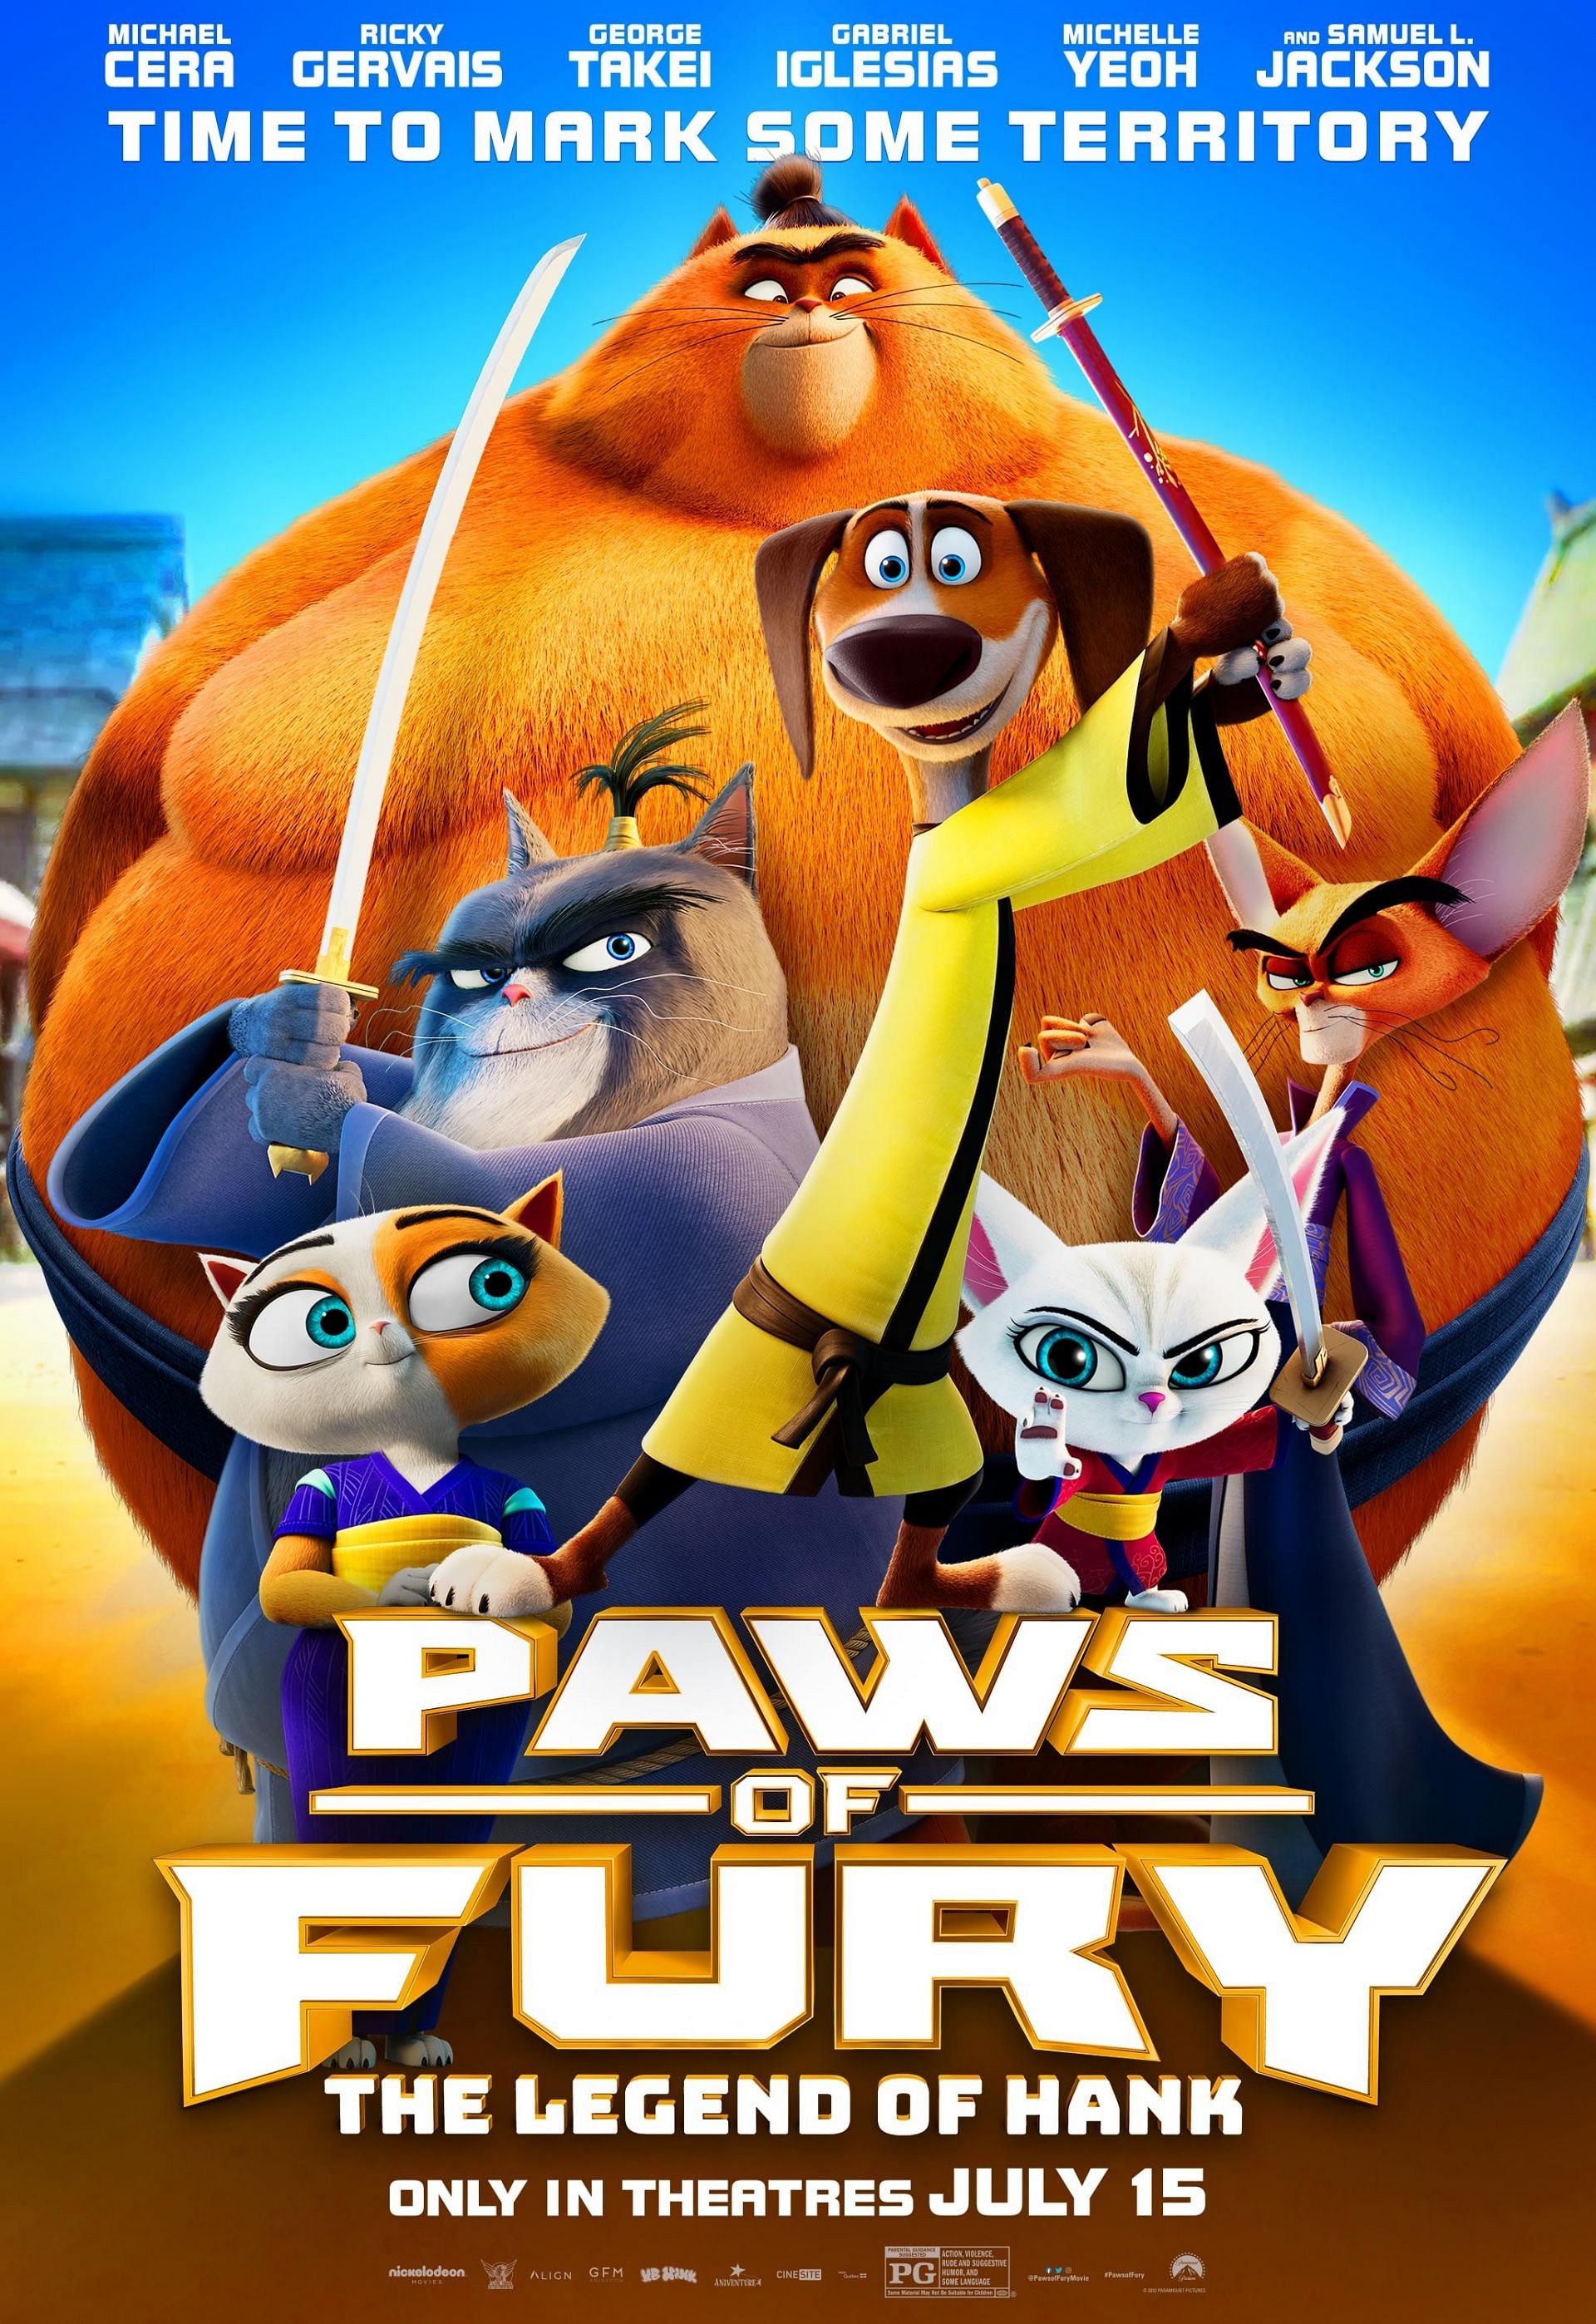 Paws of Fury: The Legend of Hank (Image via Paramount Pictures)